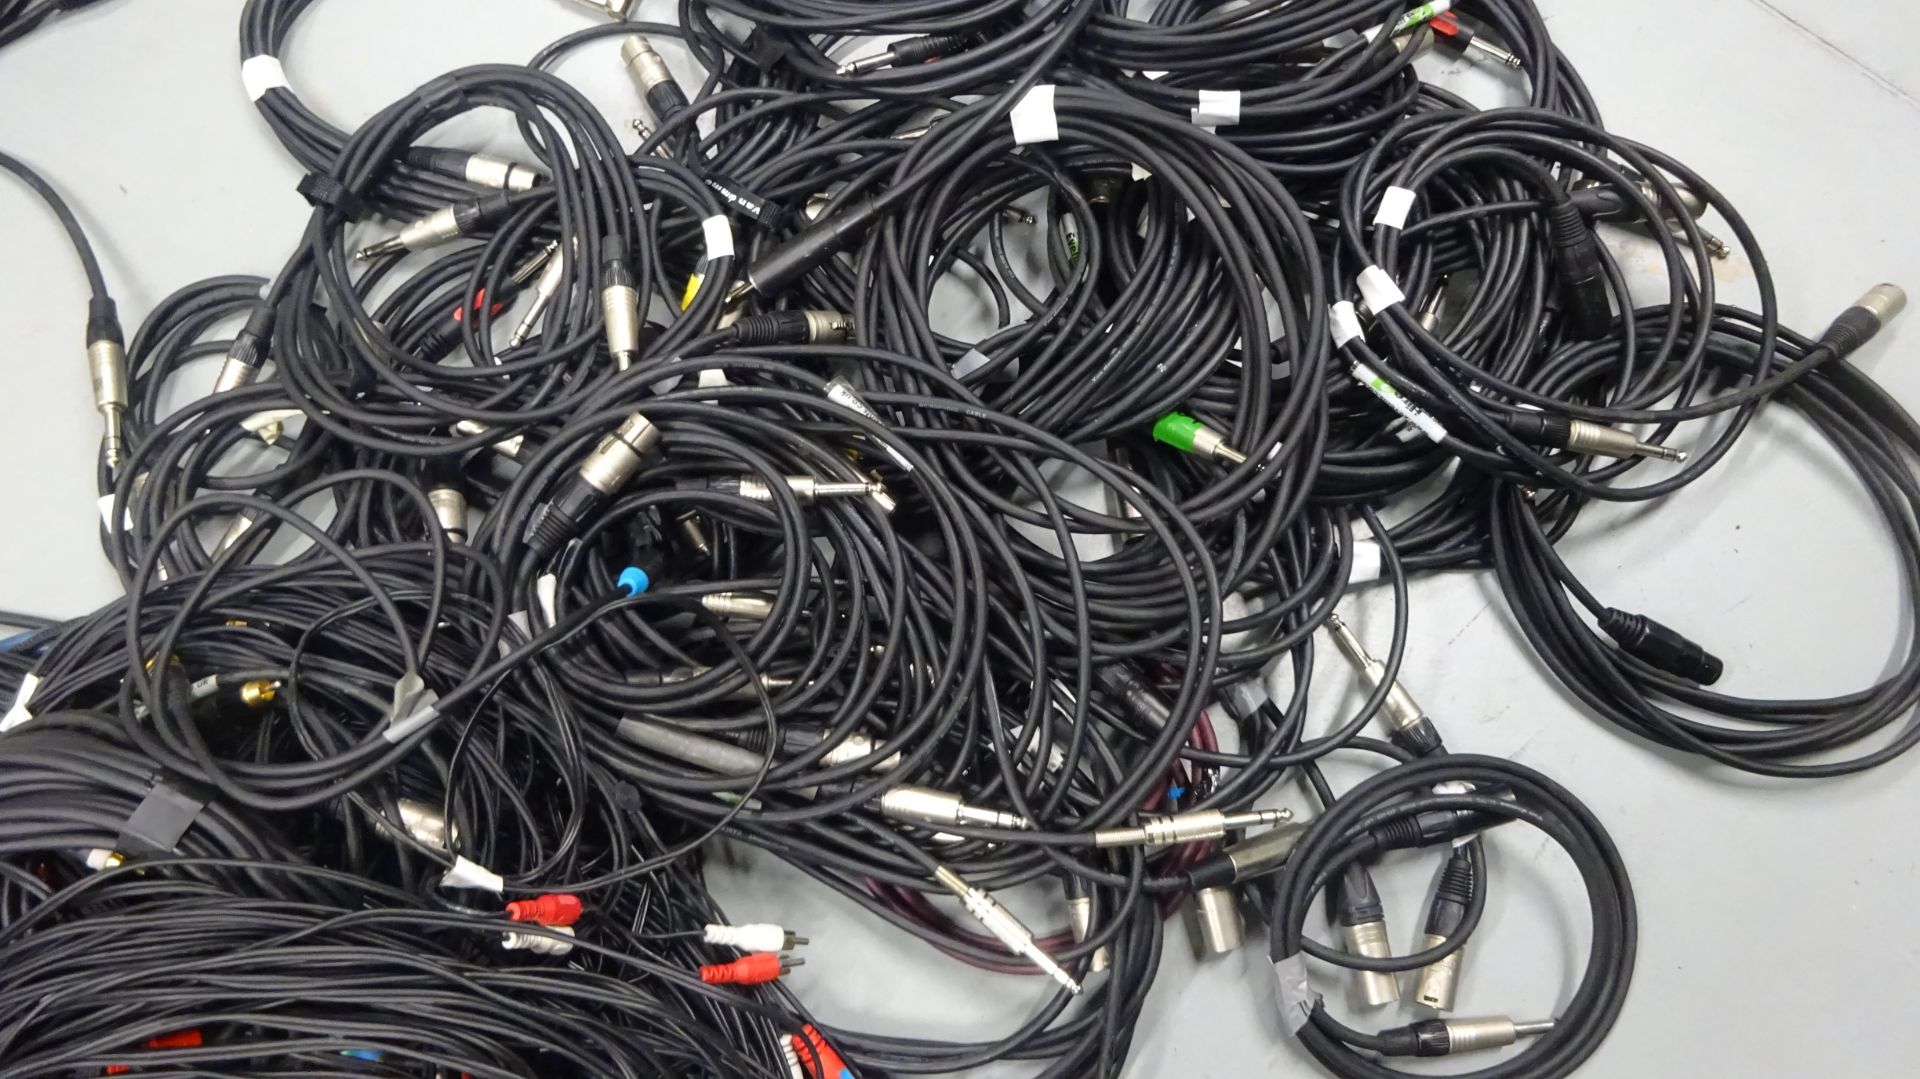 Assortment of Audio Cables - Image 2 of 3